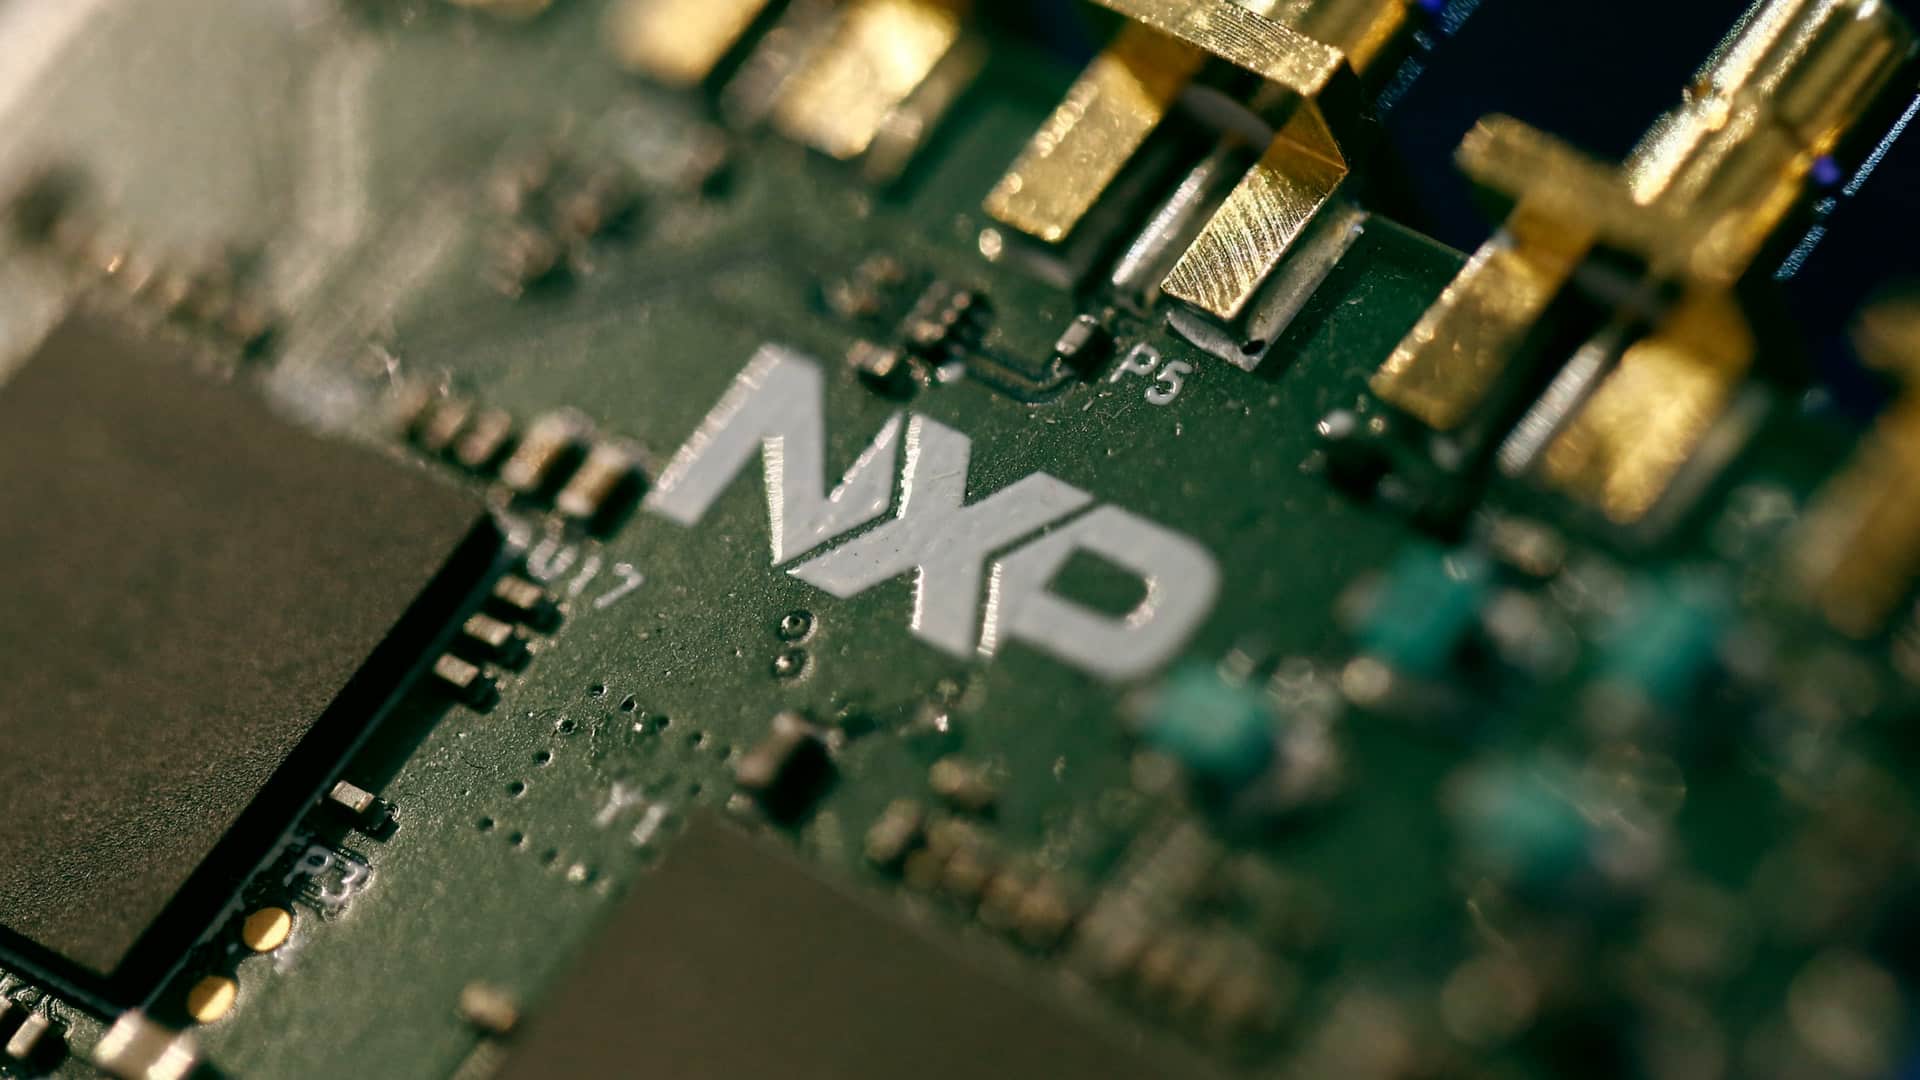 NXP Semiconductors selects TCS as strategic partner to drive IT innovation